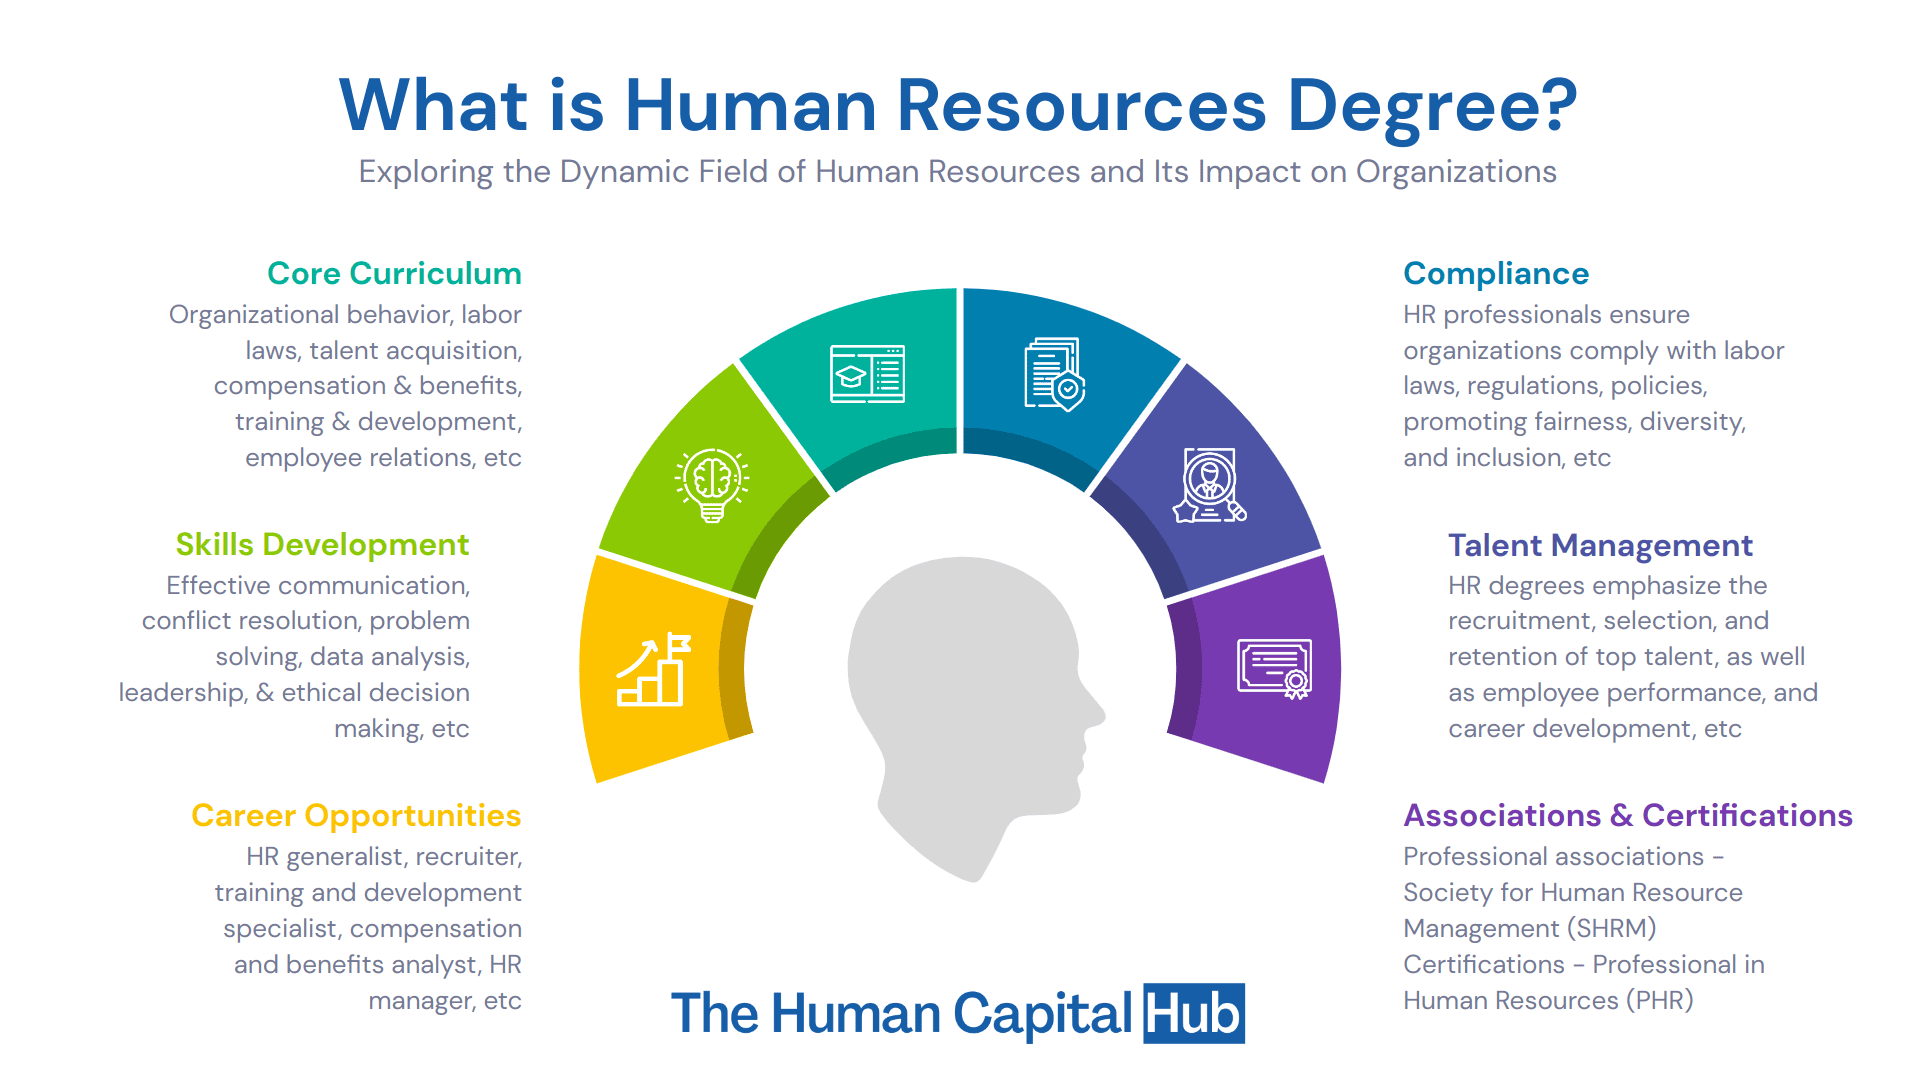 What is human resources degree?